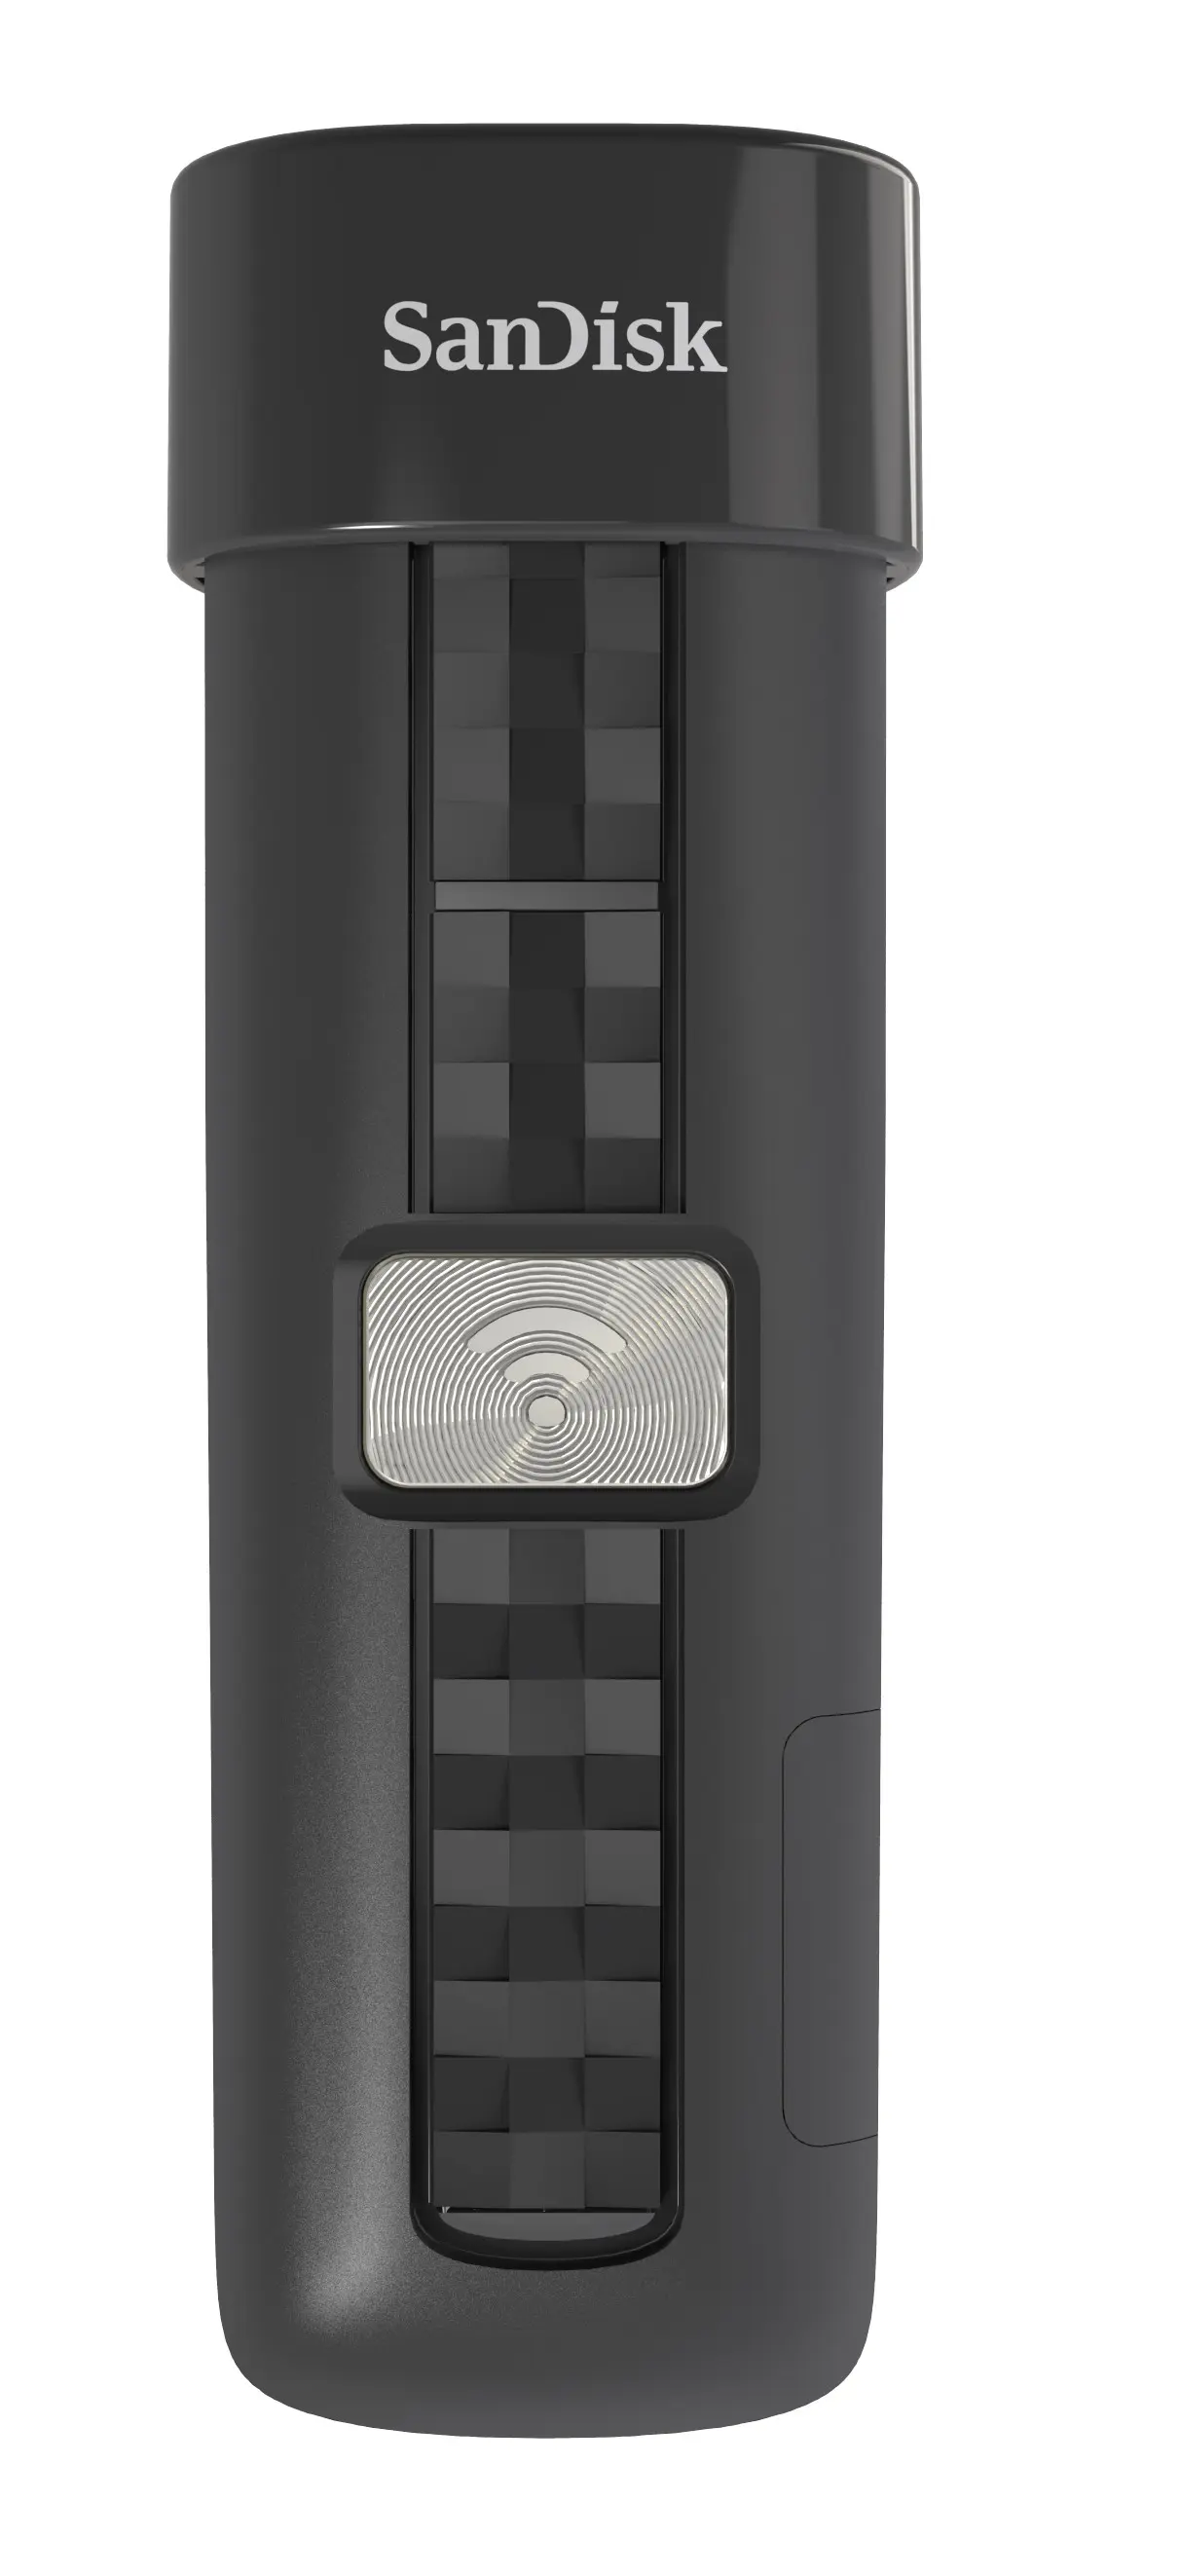 Sandisk-connected-Wireless_Flash_Drive